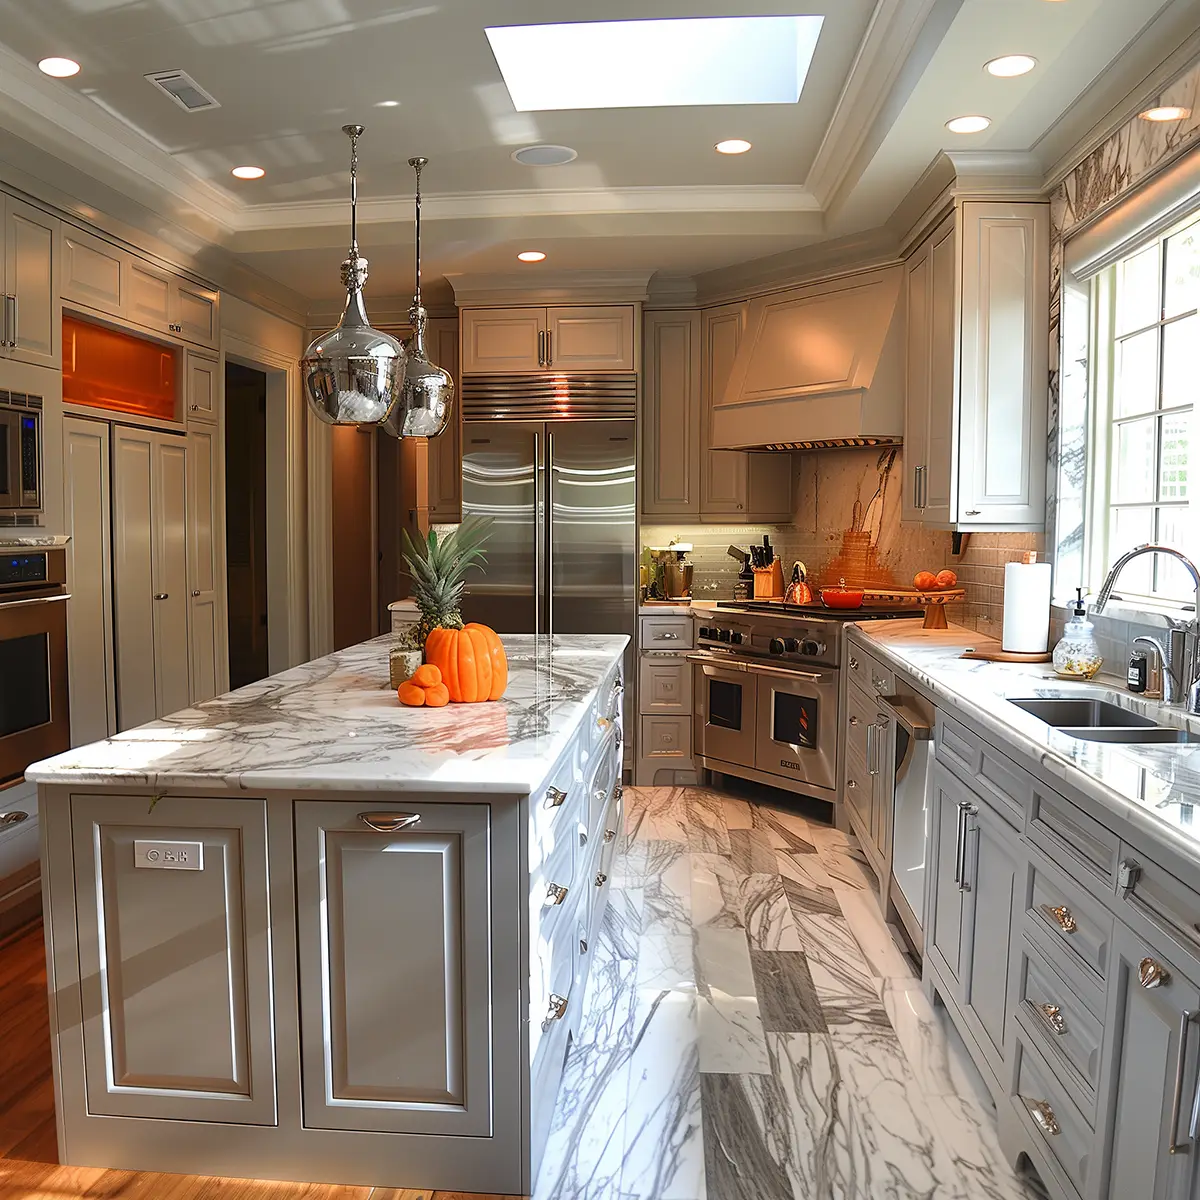 Contractor Bath and Kitchen Remodel Services Proposal Concepts